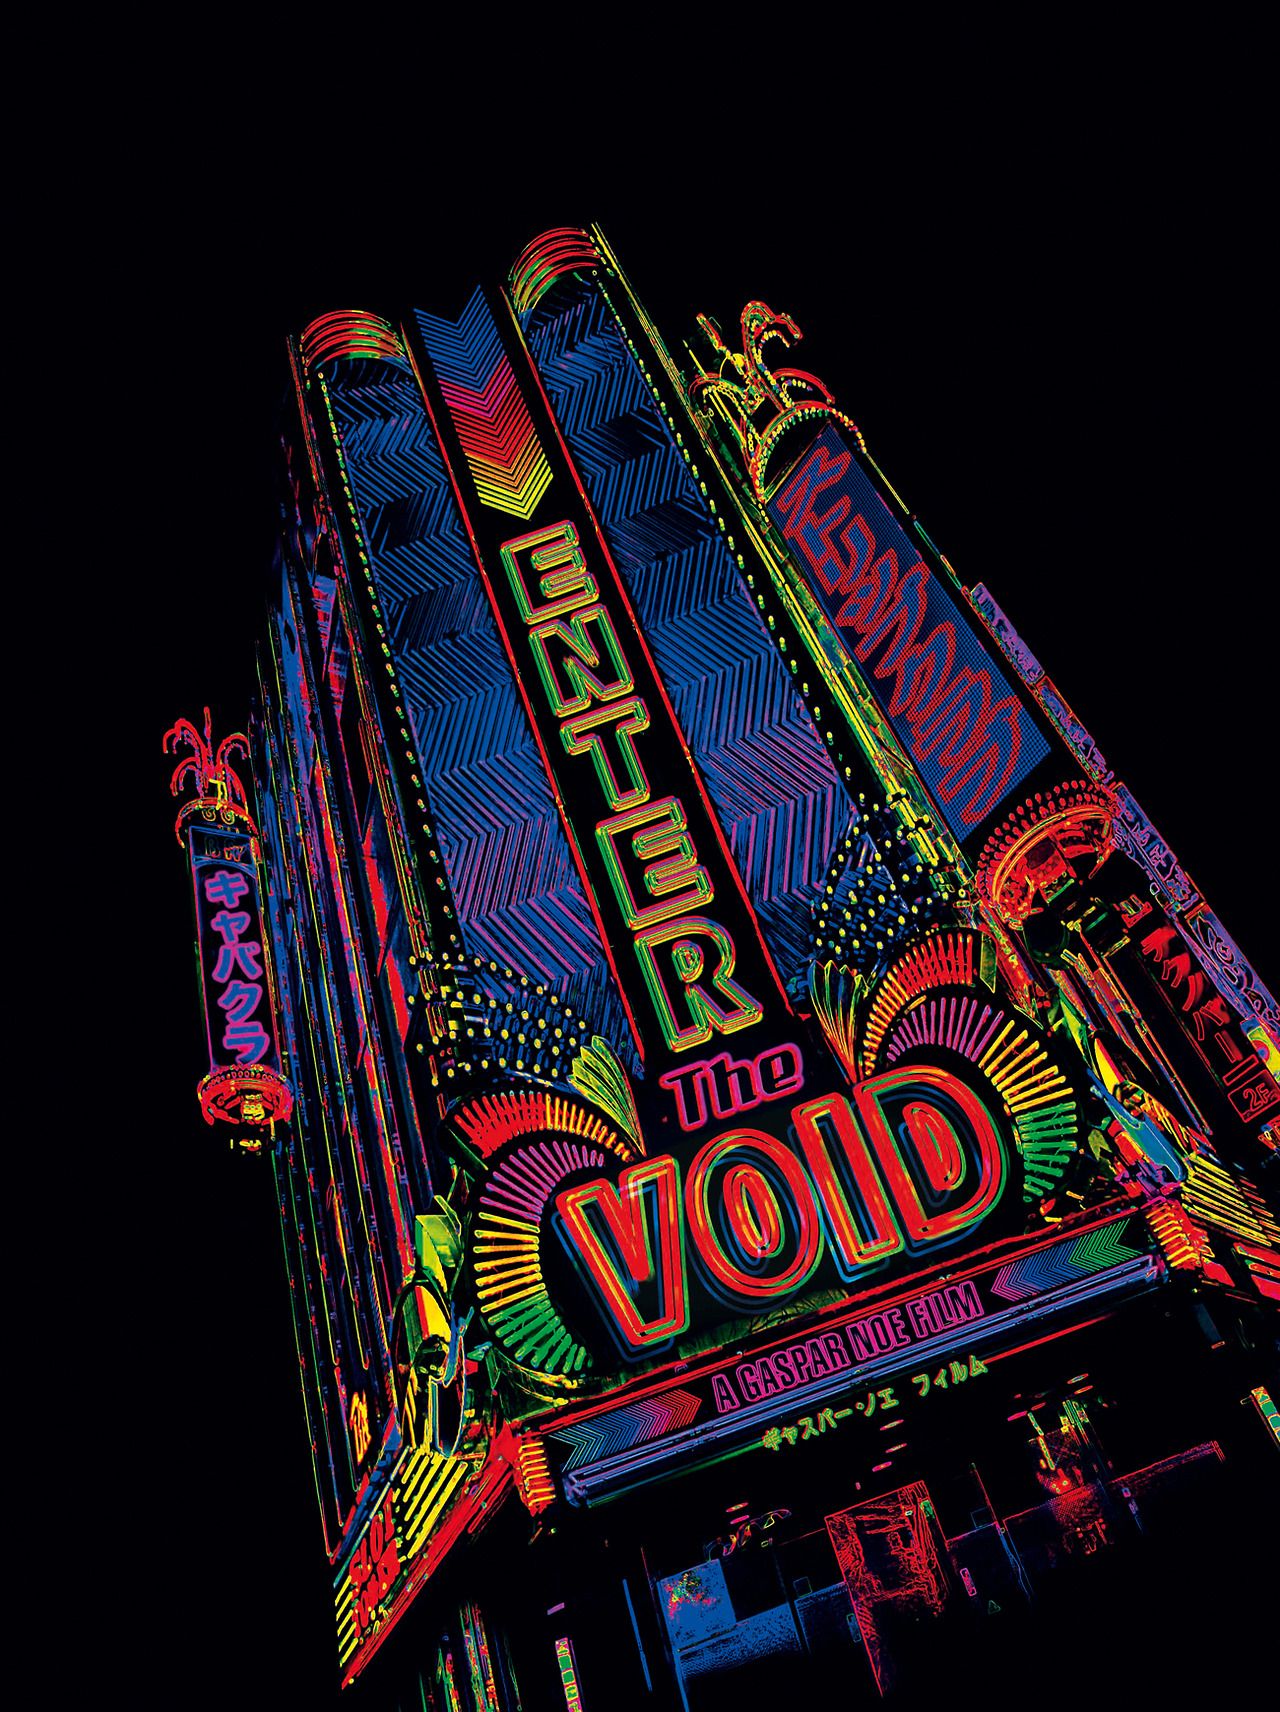 Enter The Void Wallpapers